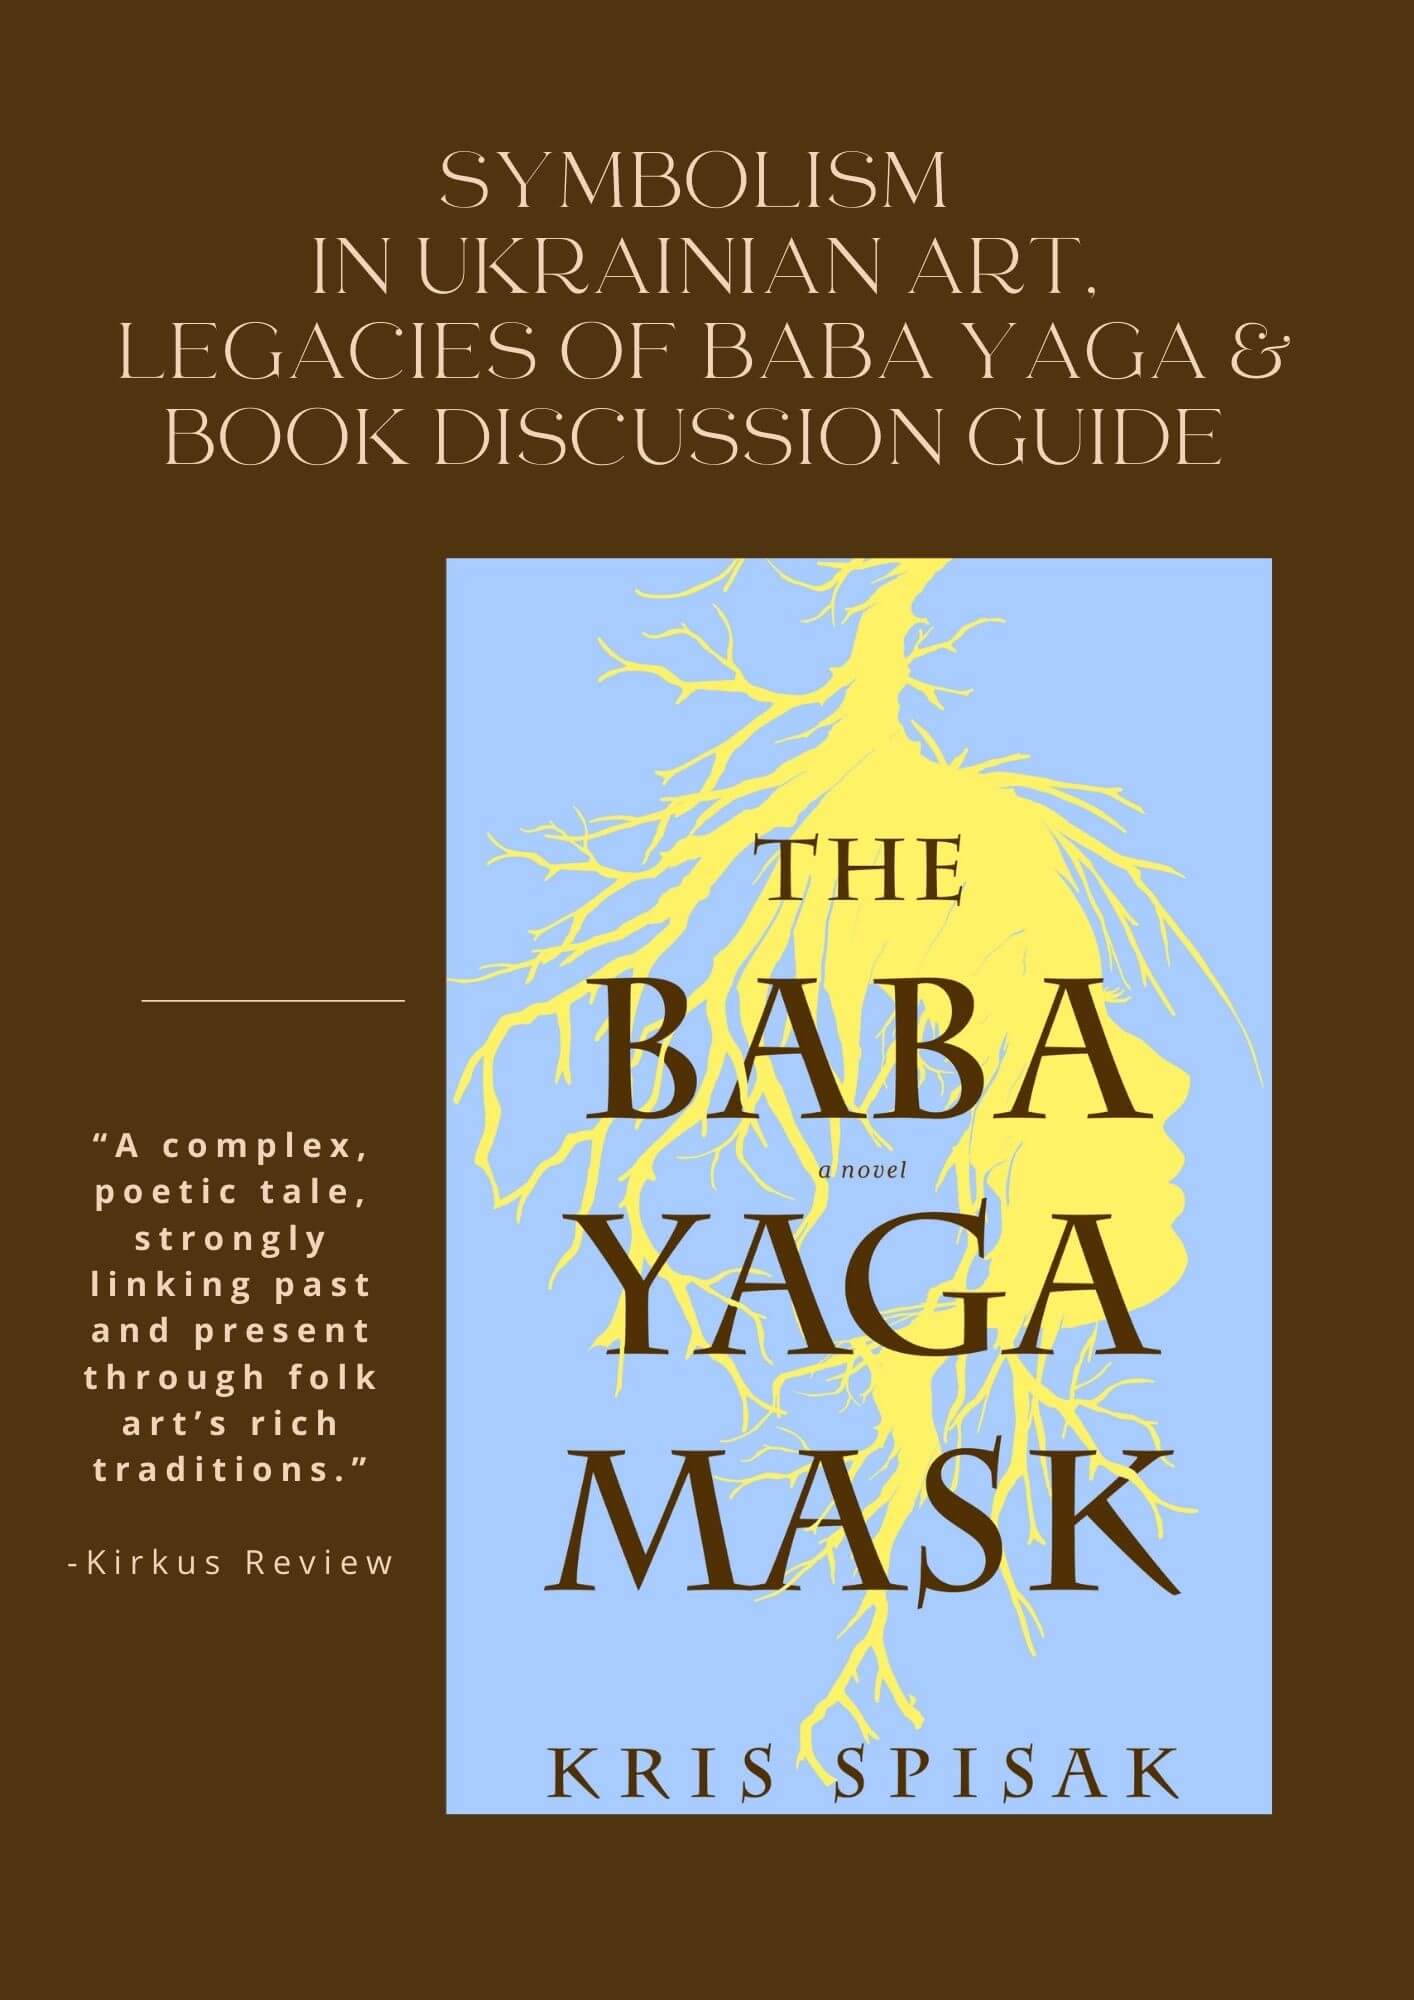 Interested in learning more about Ukrainian folk art symbolism, folktales and history? Looking for even more book club questions than can be found in the end of The Baba Yaga Mask? This book club guide was created just for you.